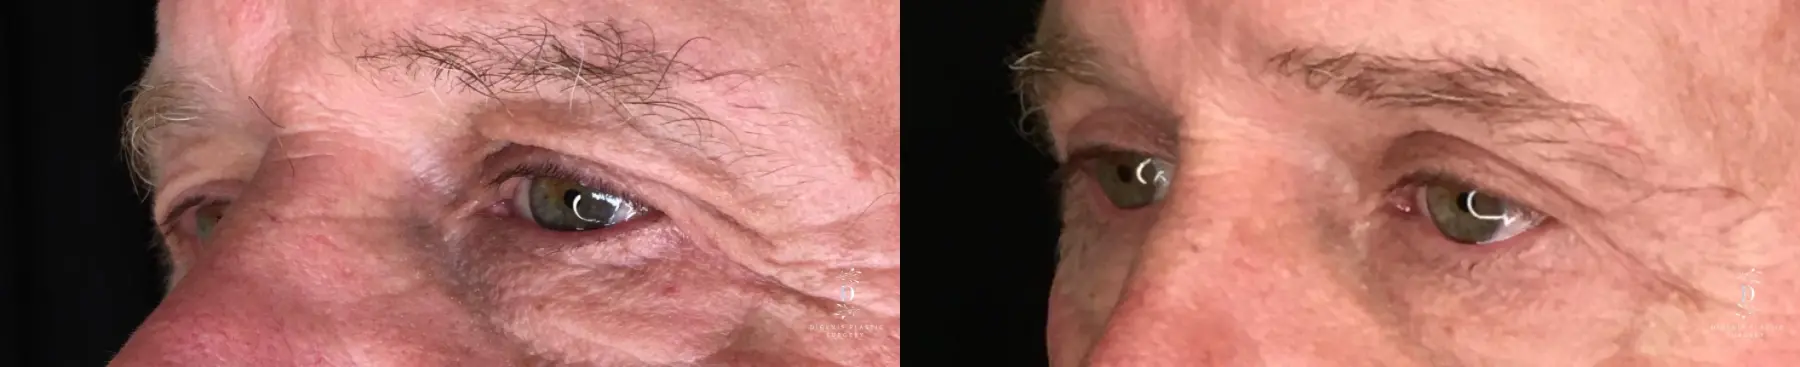 Eyelid Surgery: Patient 31 - Before and After 4